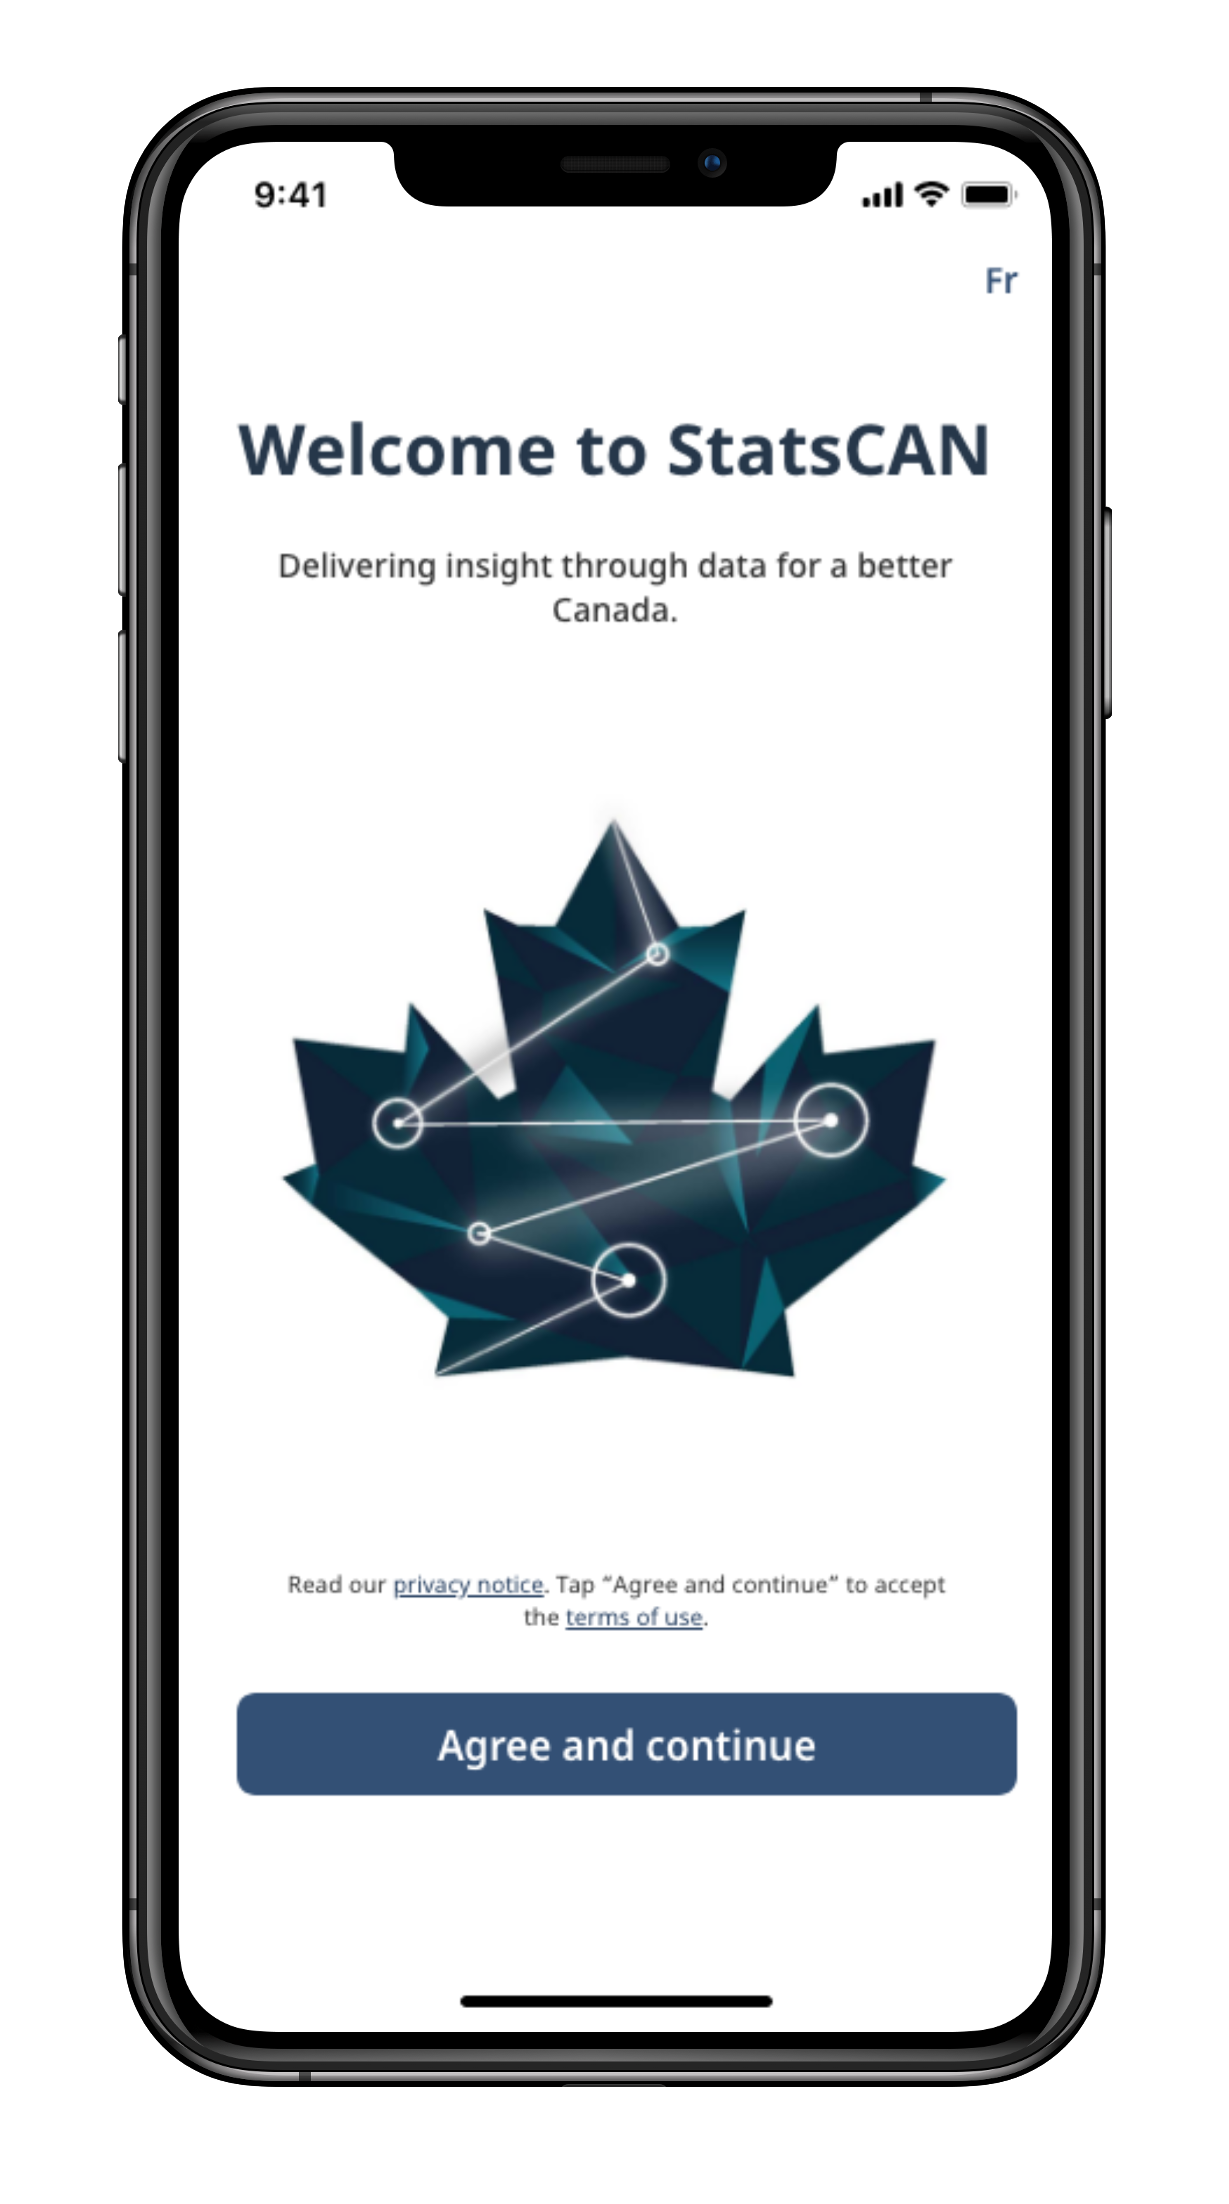 StatsCAN App welcome screen: Welcome to StatsCAN. Delivering insight through data for a better Canada. 